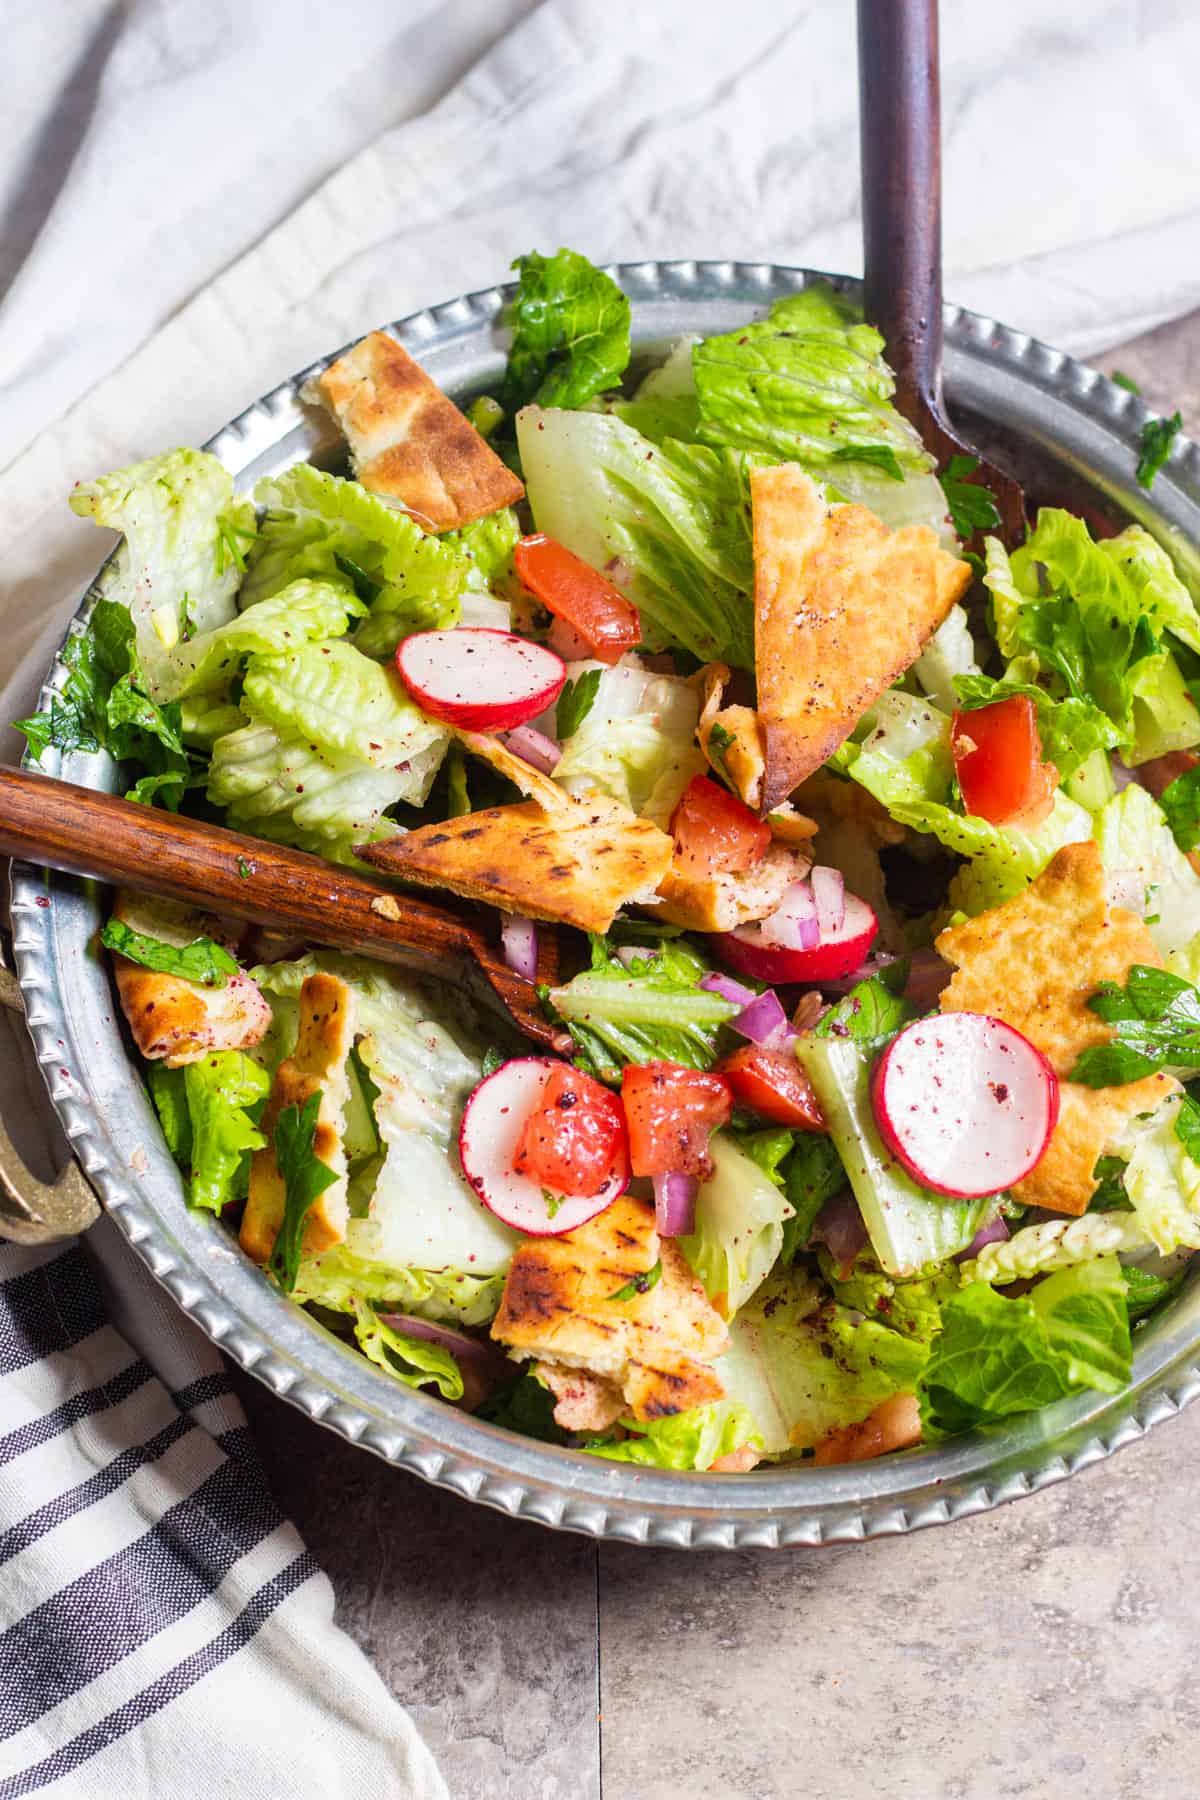 This authentic Lebanese fattoush salad is a Middle Eastern classic. Fresh chopped salad is flavored with crispy toasted pita and a bright, zesty dressing.